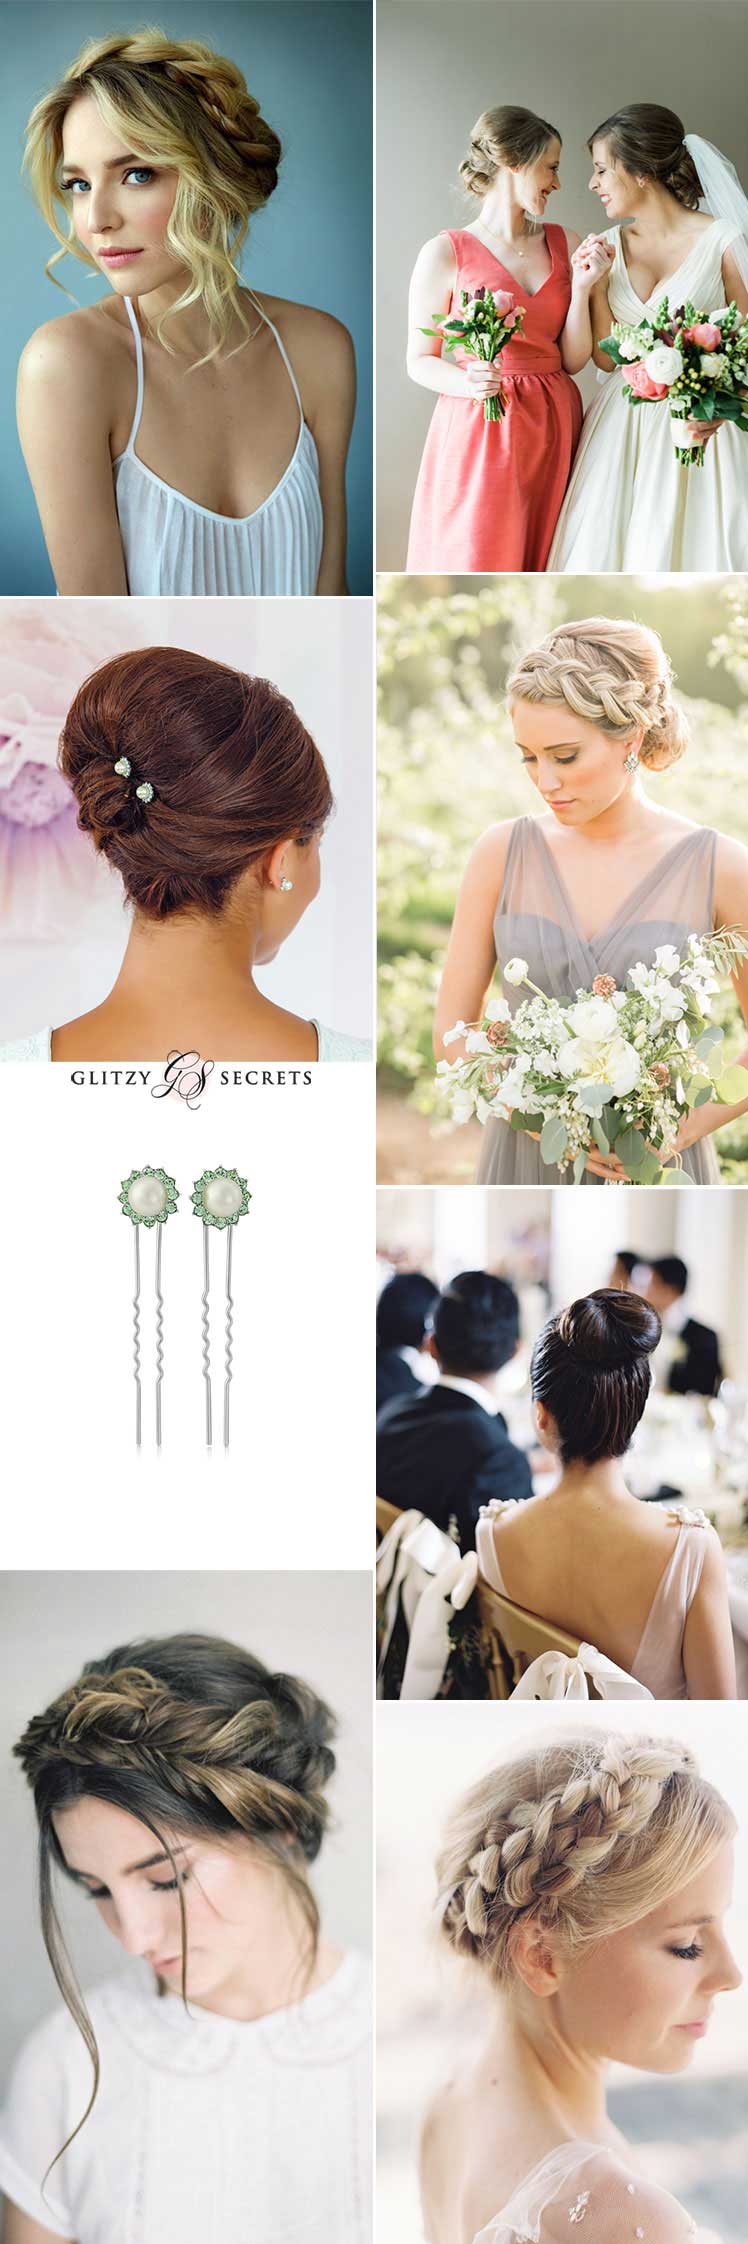 Bridesmaid up hairstyle inspiration